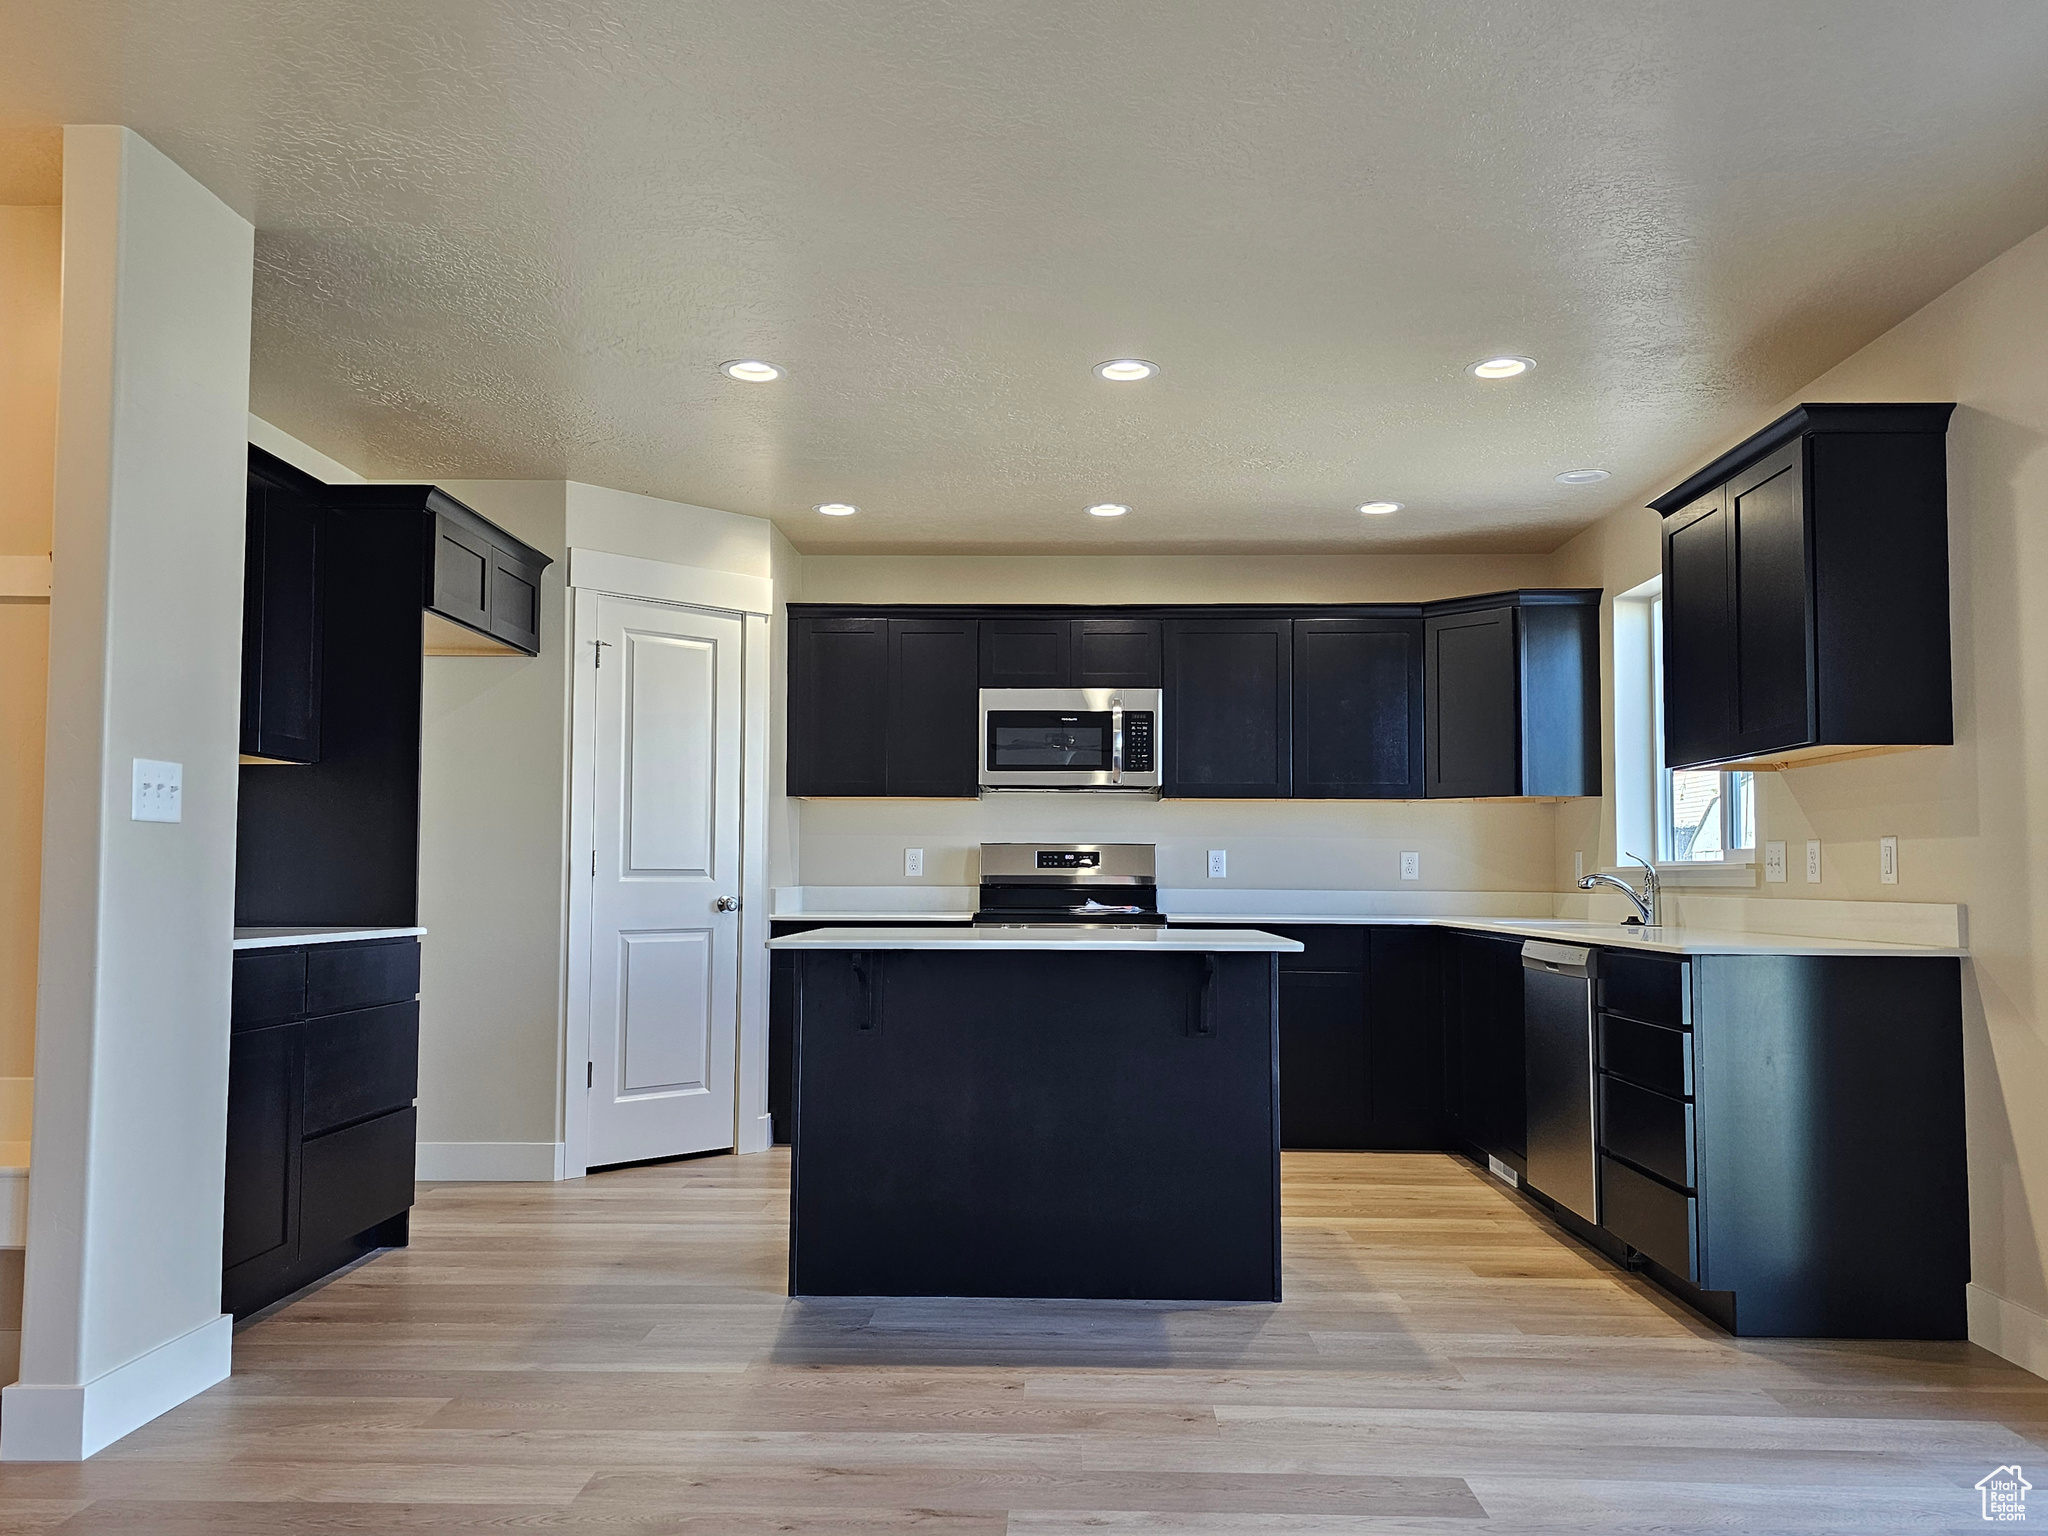 Kitchen with a kitchen bar, appliances with stainless steel finishes, light wood-type flooring, and a kitchen island